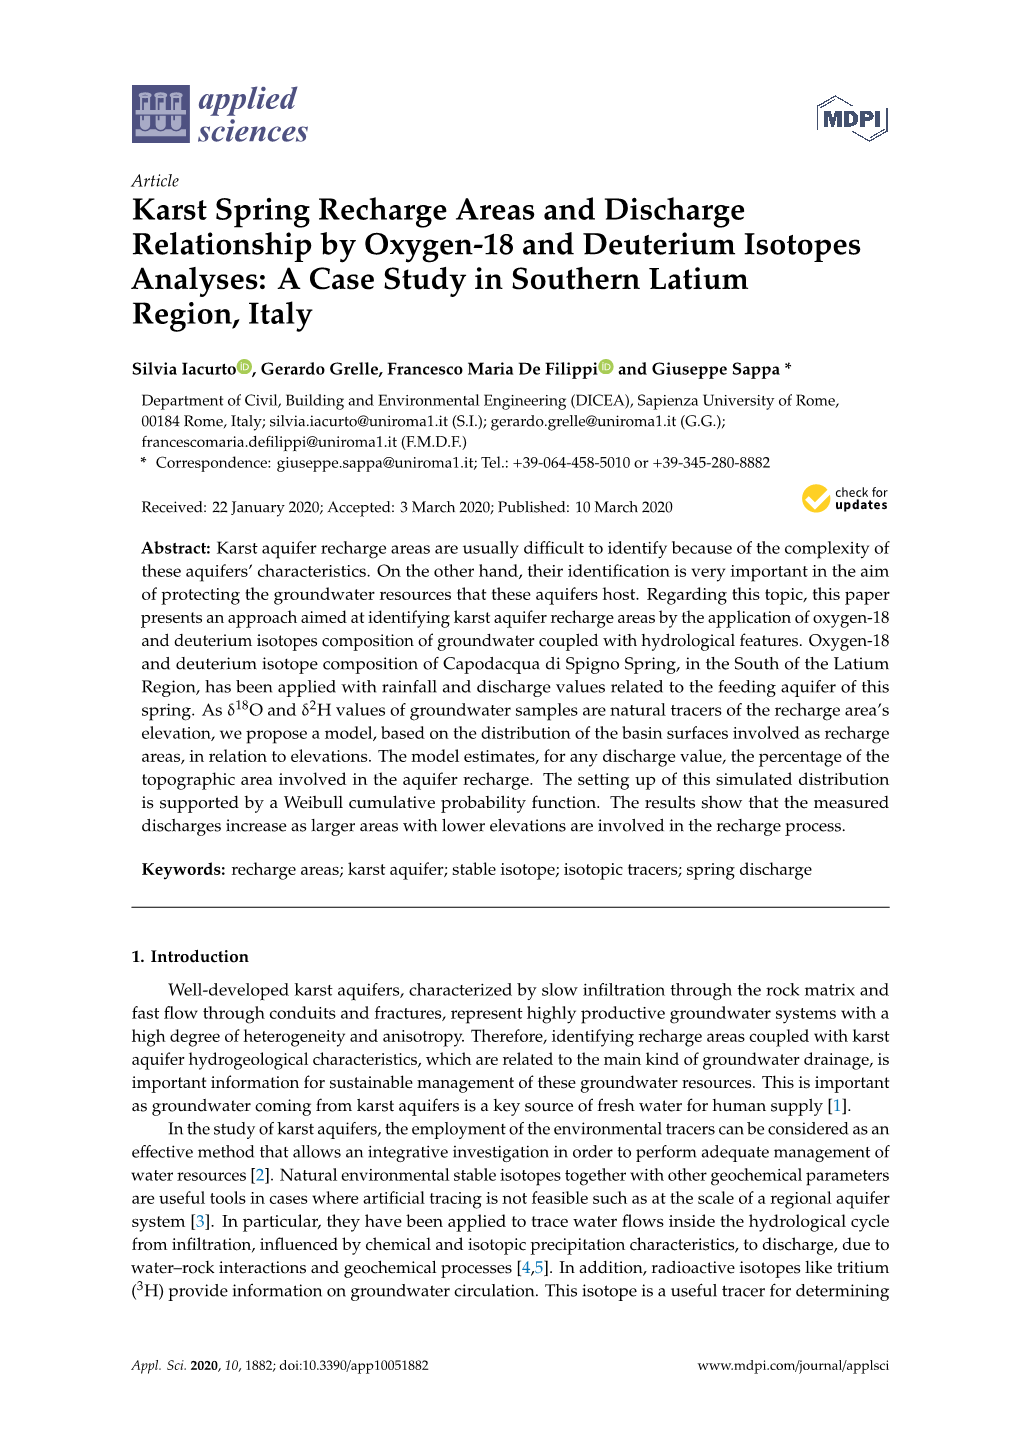 Karst Spring Recharge Areas and Discharge Relationship by Oxygen-18 and Deuterium Isotopes Analyses: a Case Study in Southern Latium Region, Italy